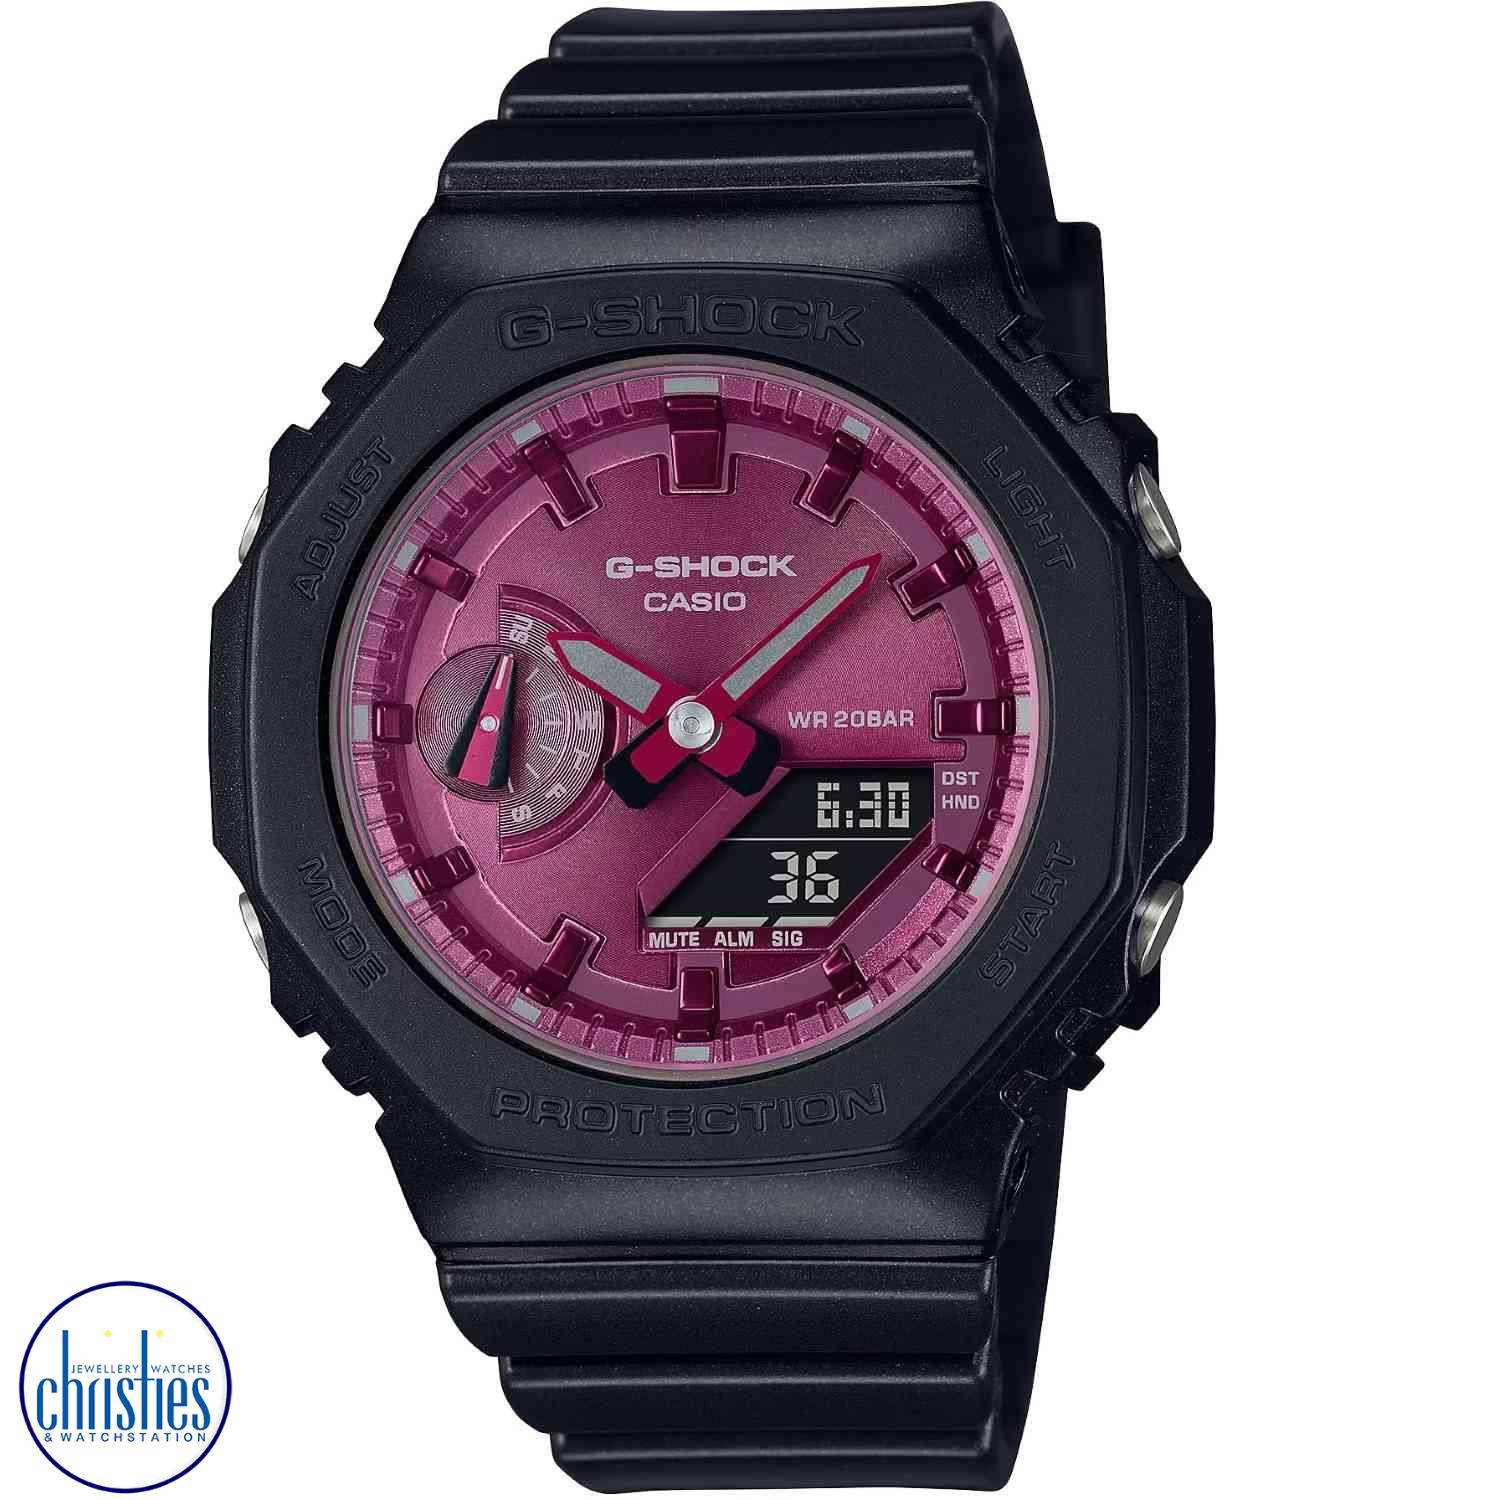  GMA-S2100RB-1A G-Shock Analog-Digital Women GMA-S2100RB-1 Watches Auckland